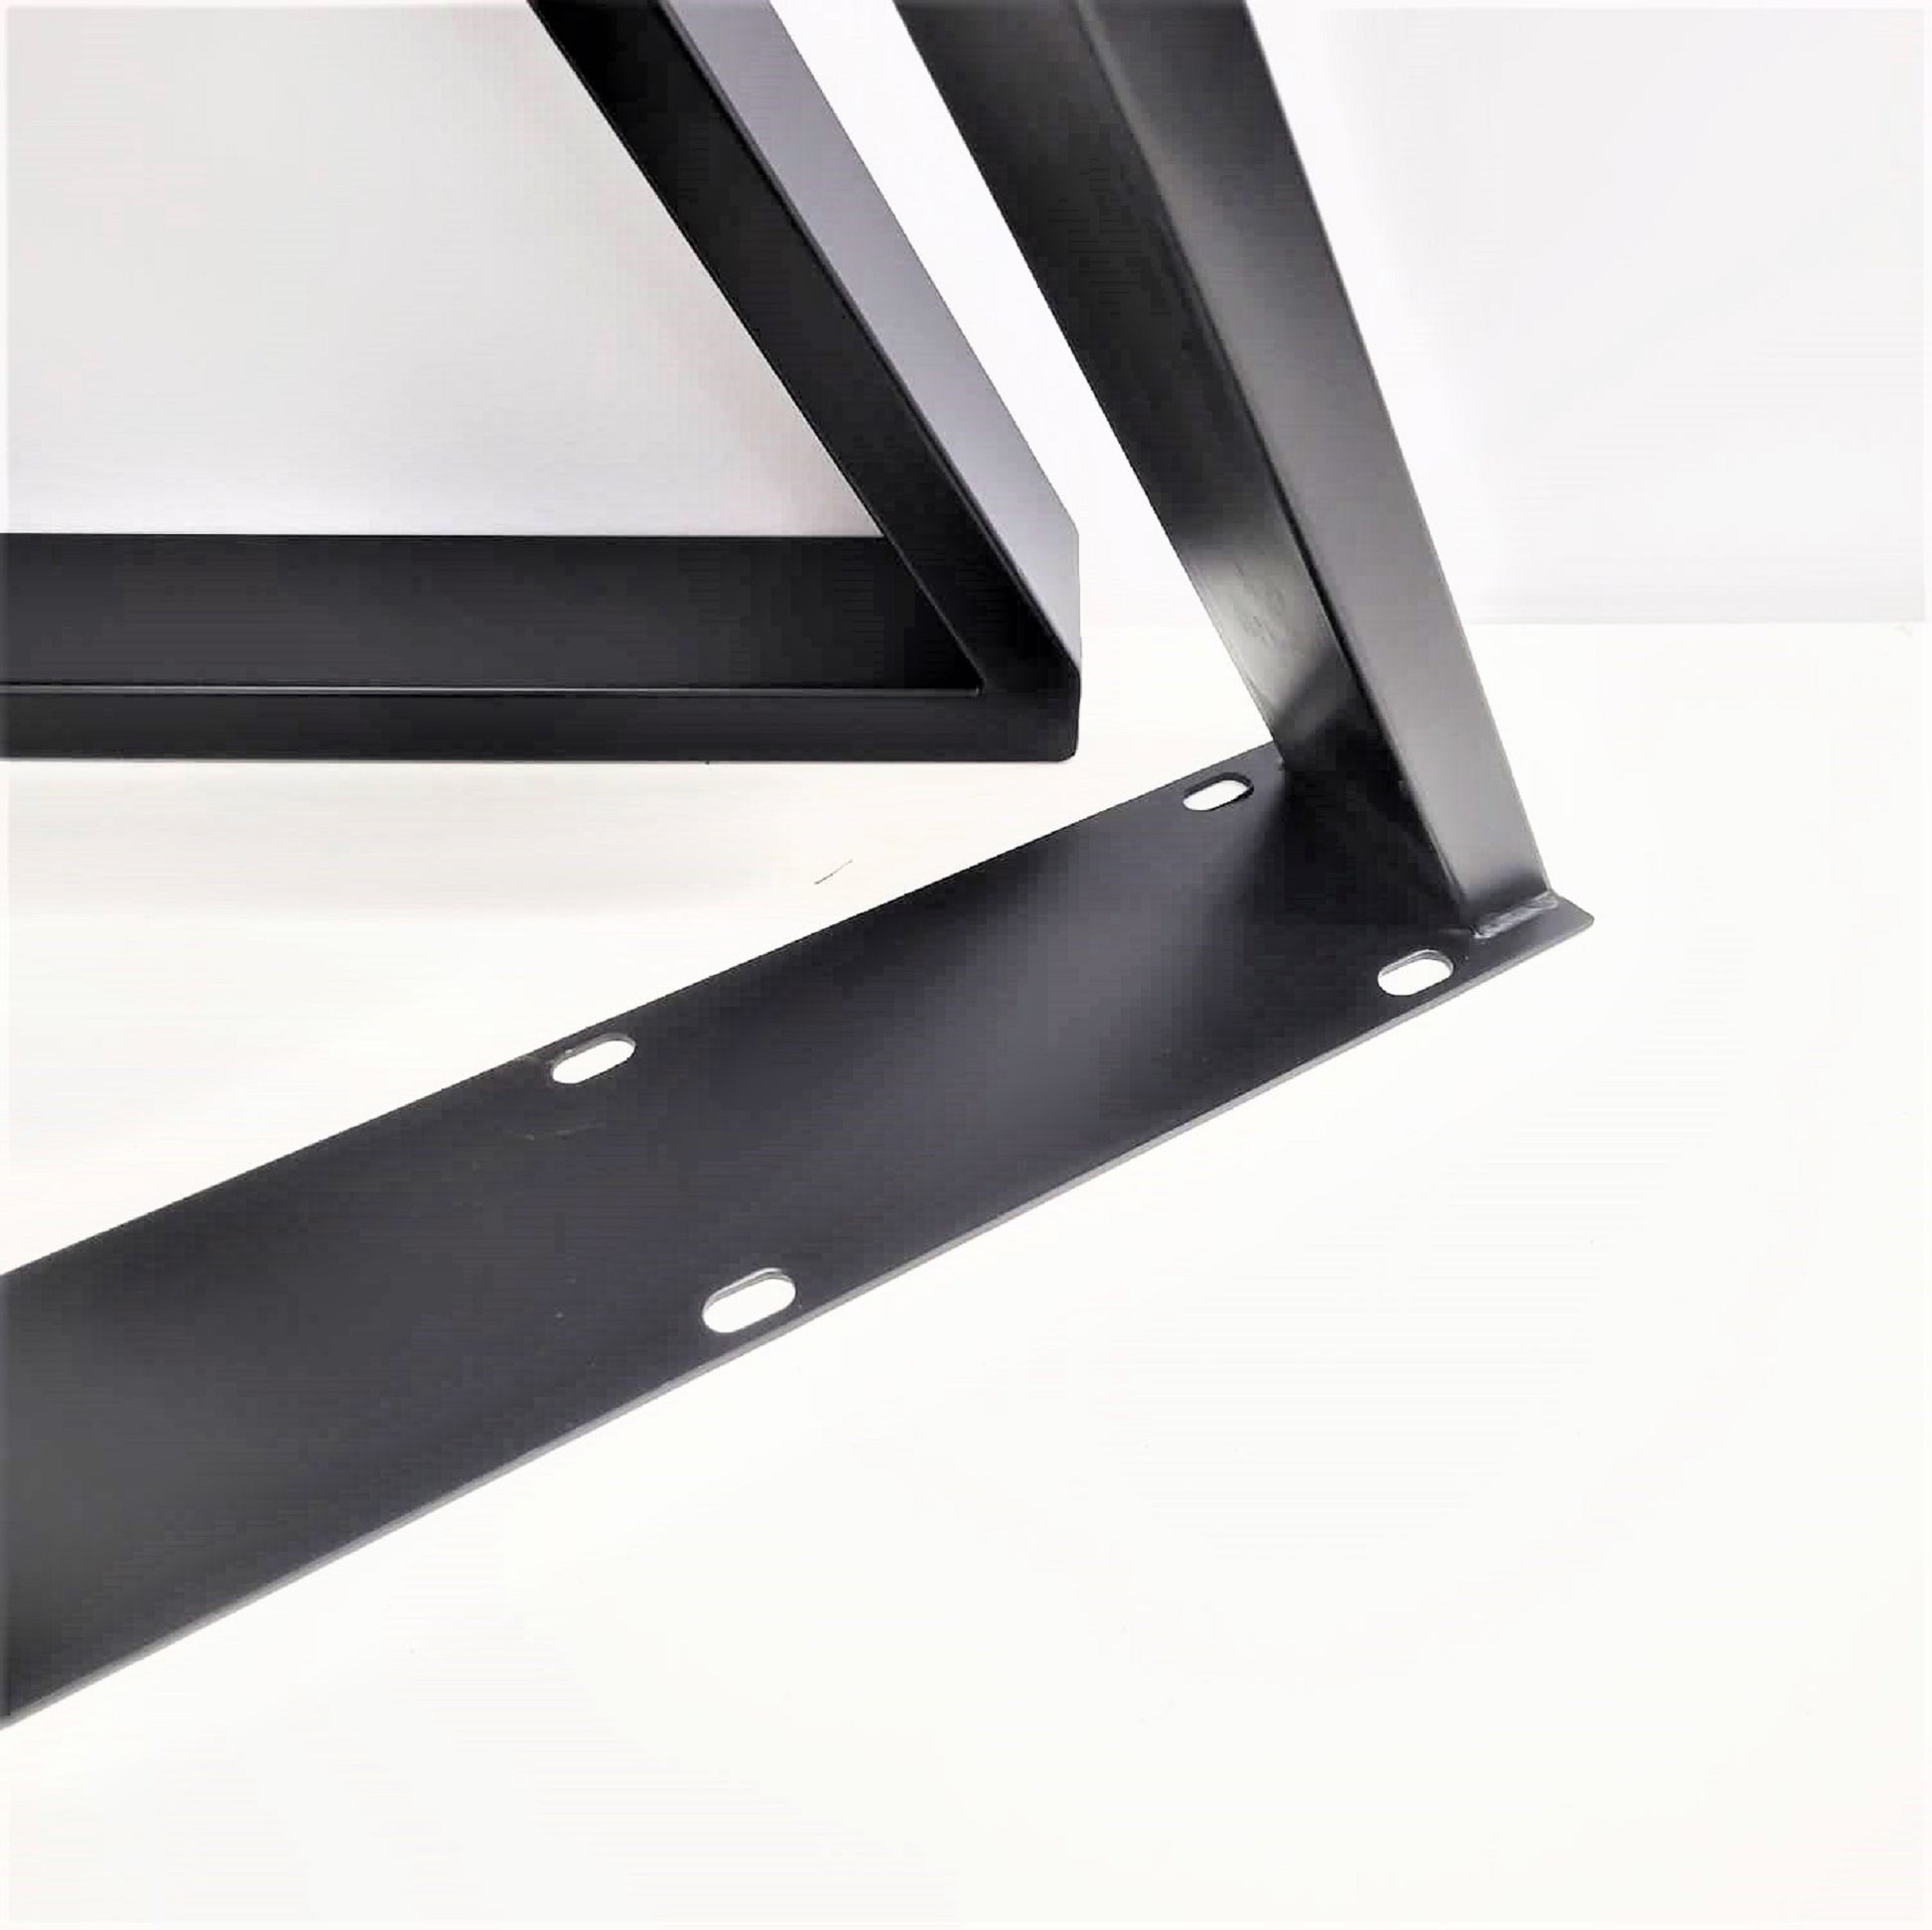 Metal Legs, Furniture Legs, Counter Height Legs, Counter Table Legs, Diamond Shape Legs, Table Base, Desk Base, Metal Base for Table